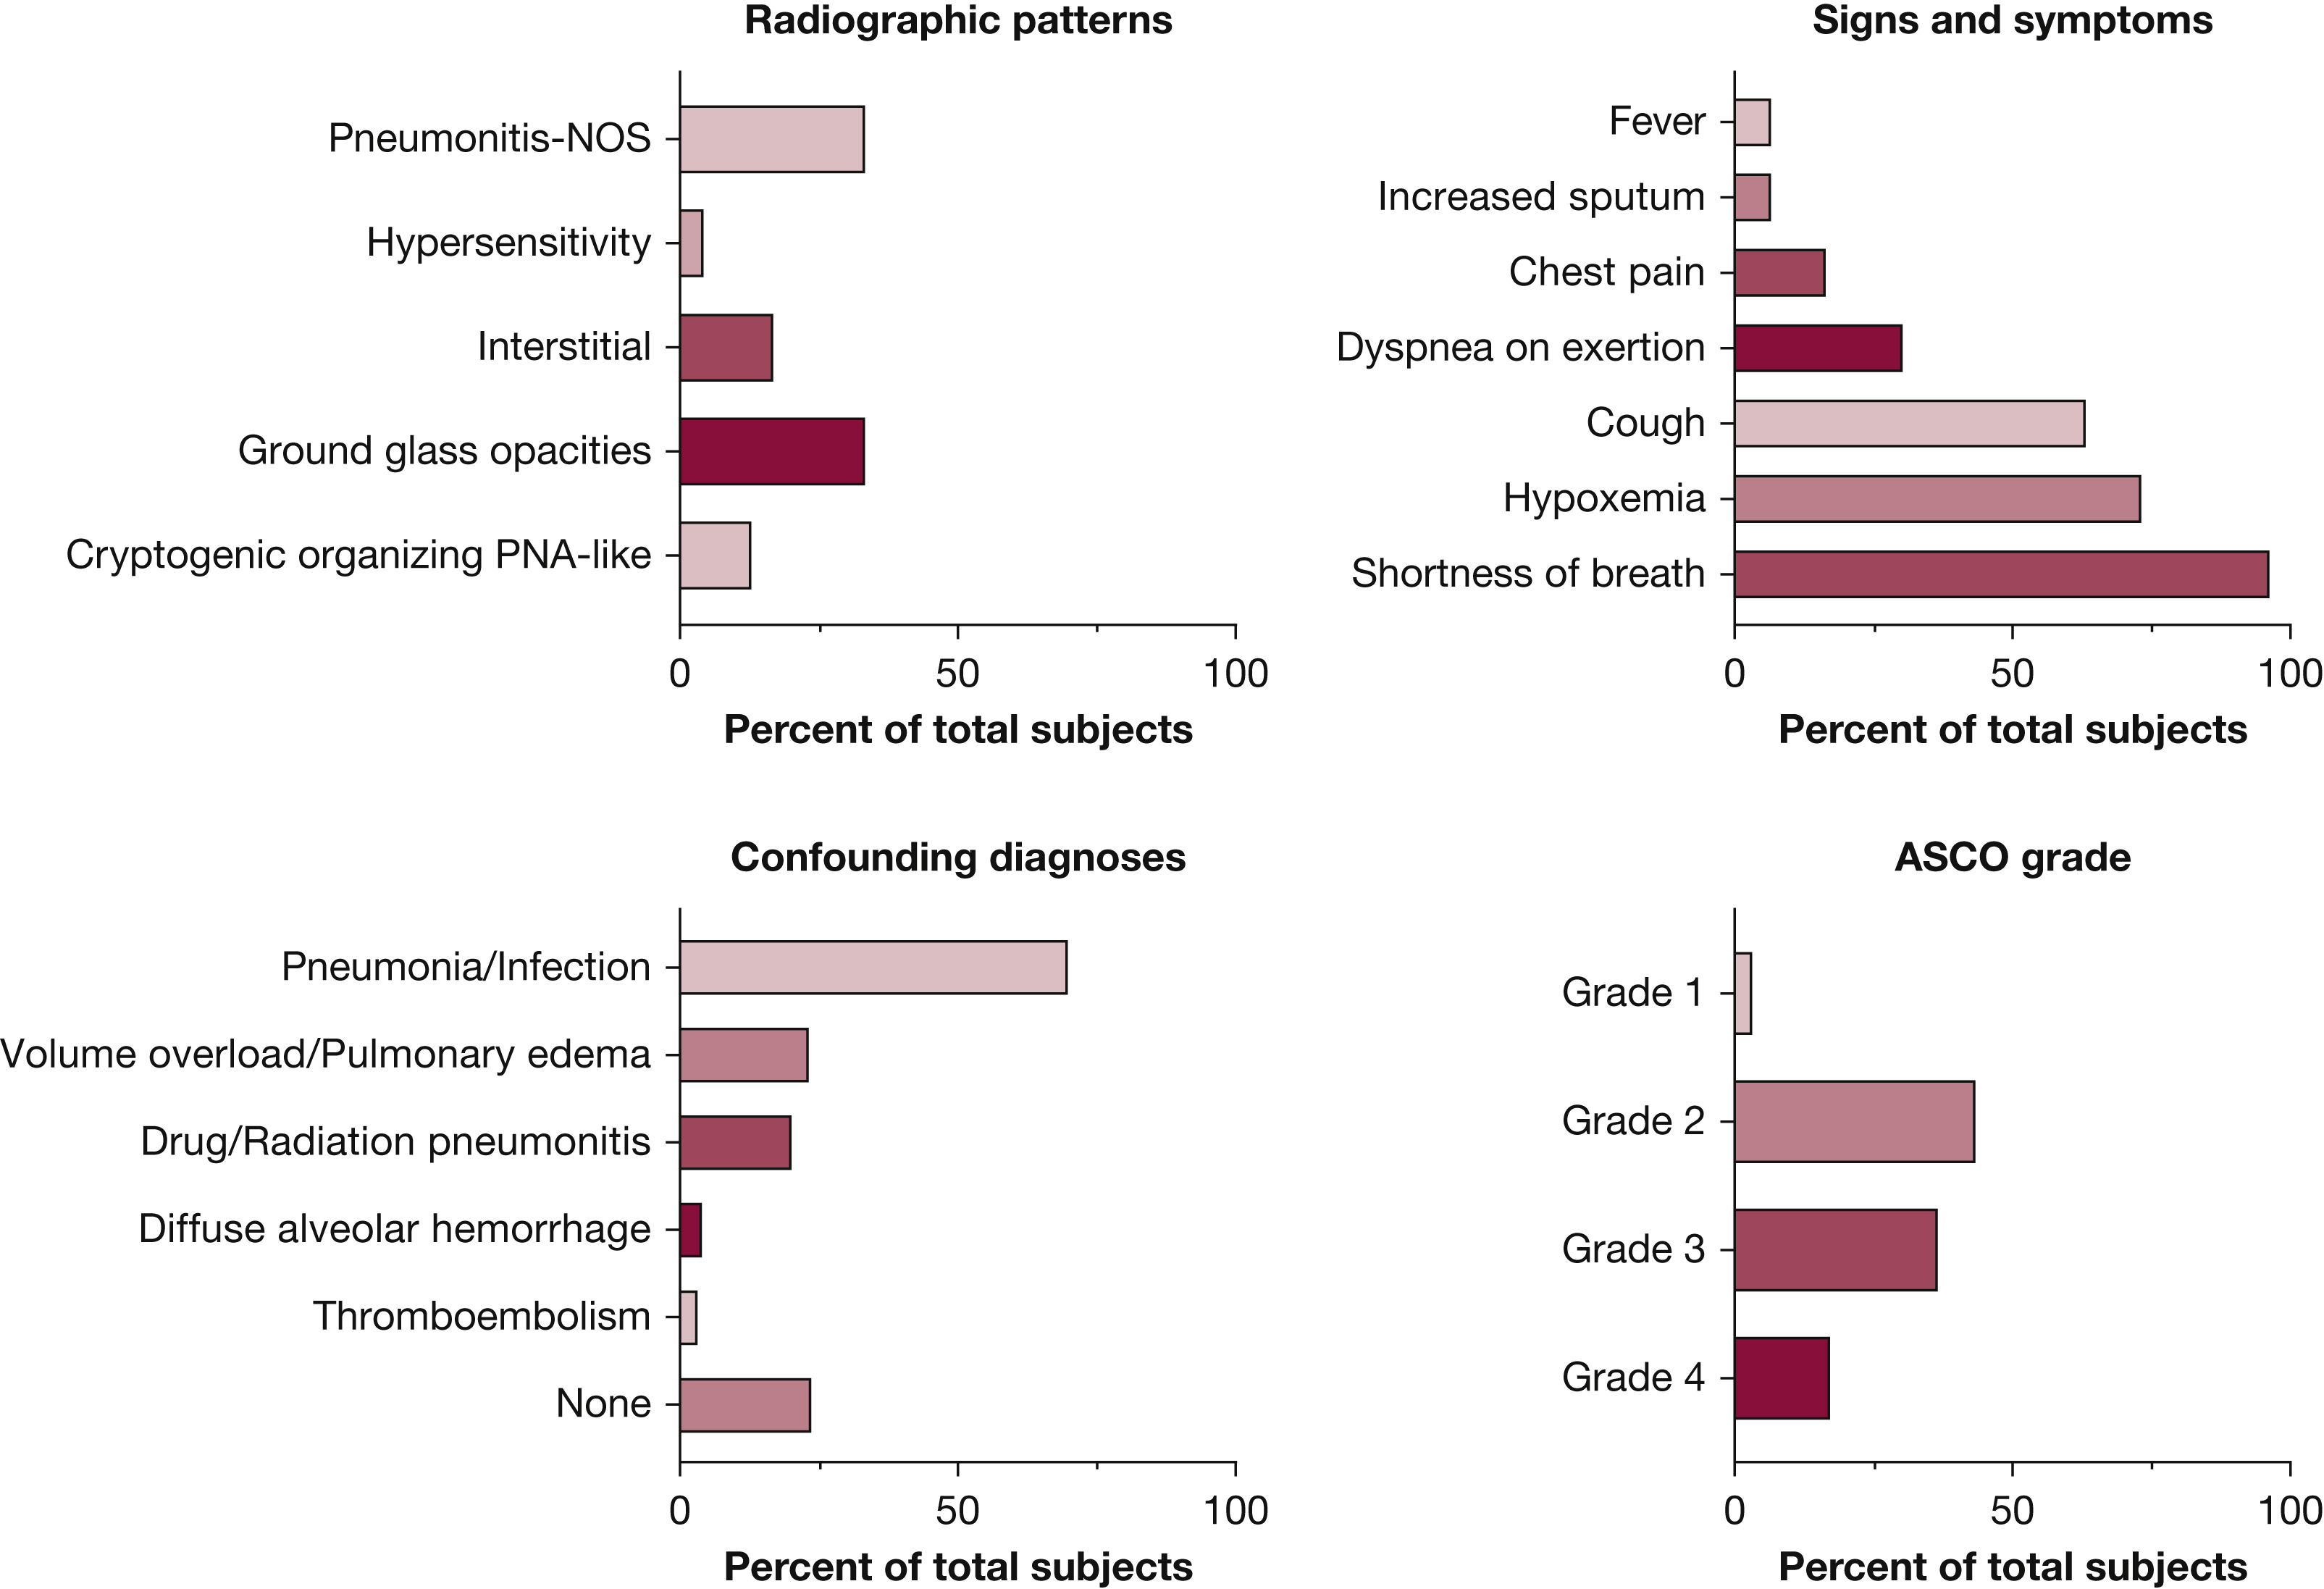 Bar graphs showing ICI-P clinical and radiographic features